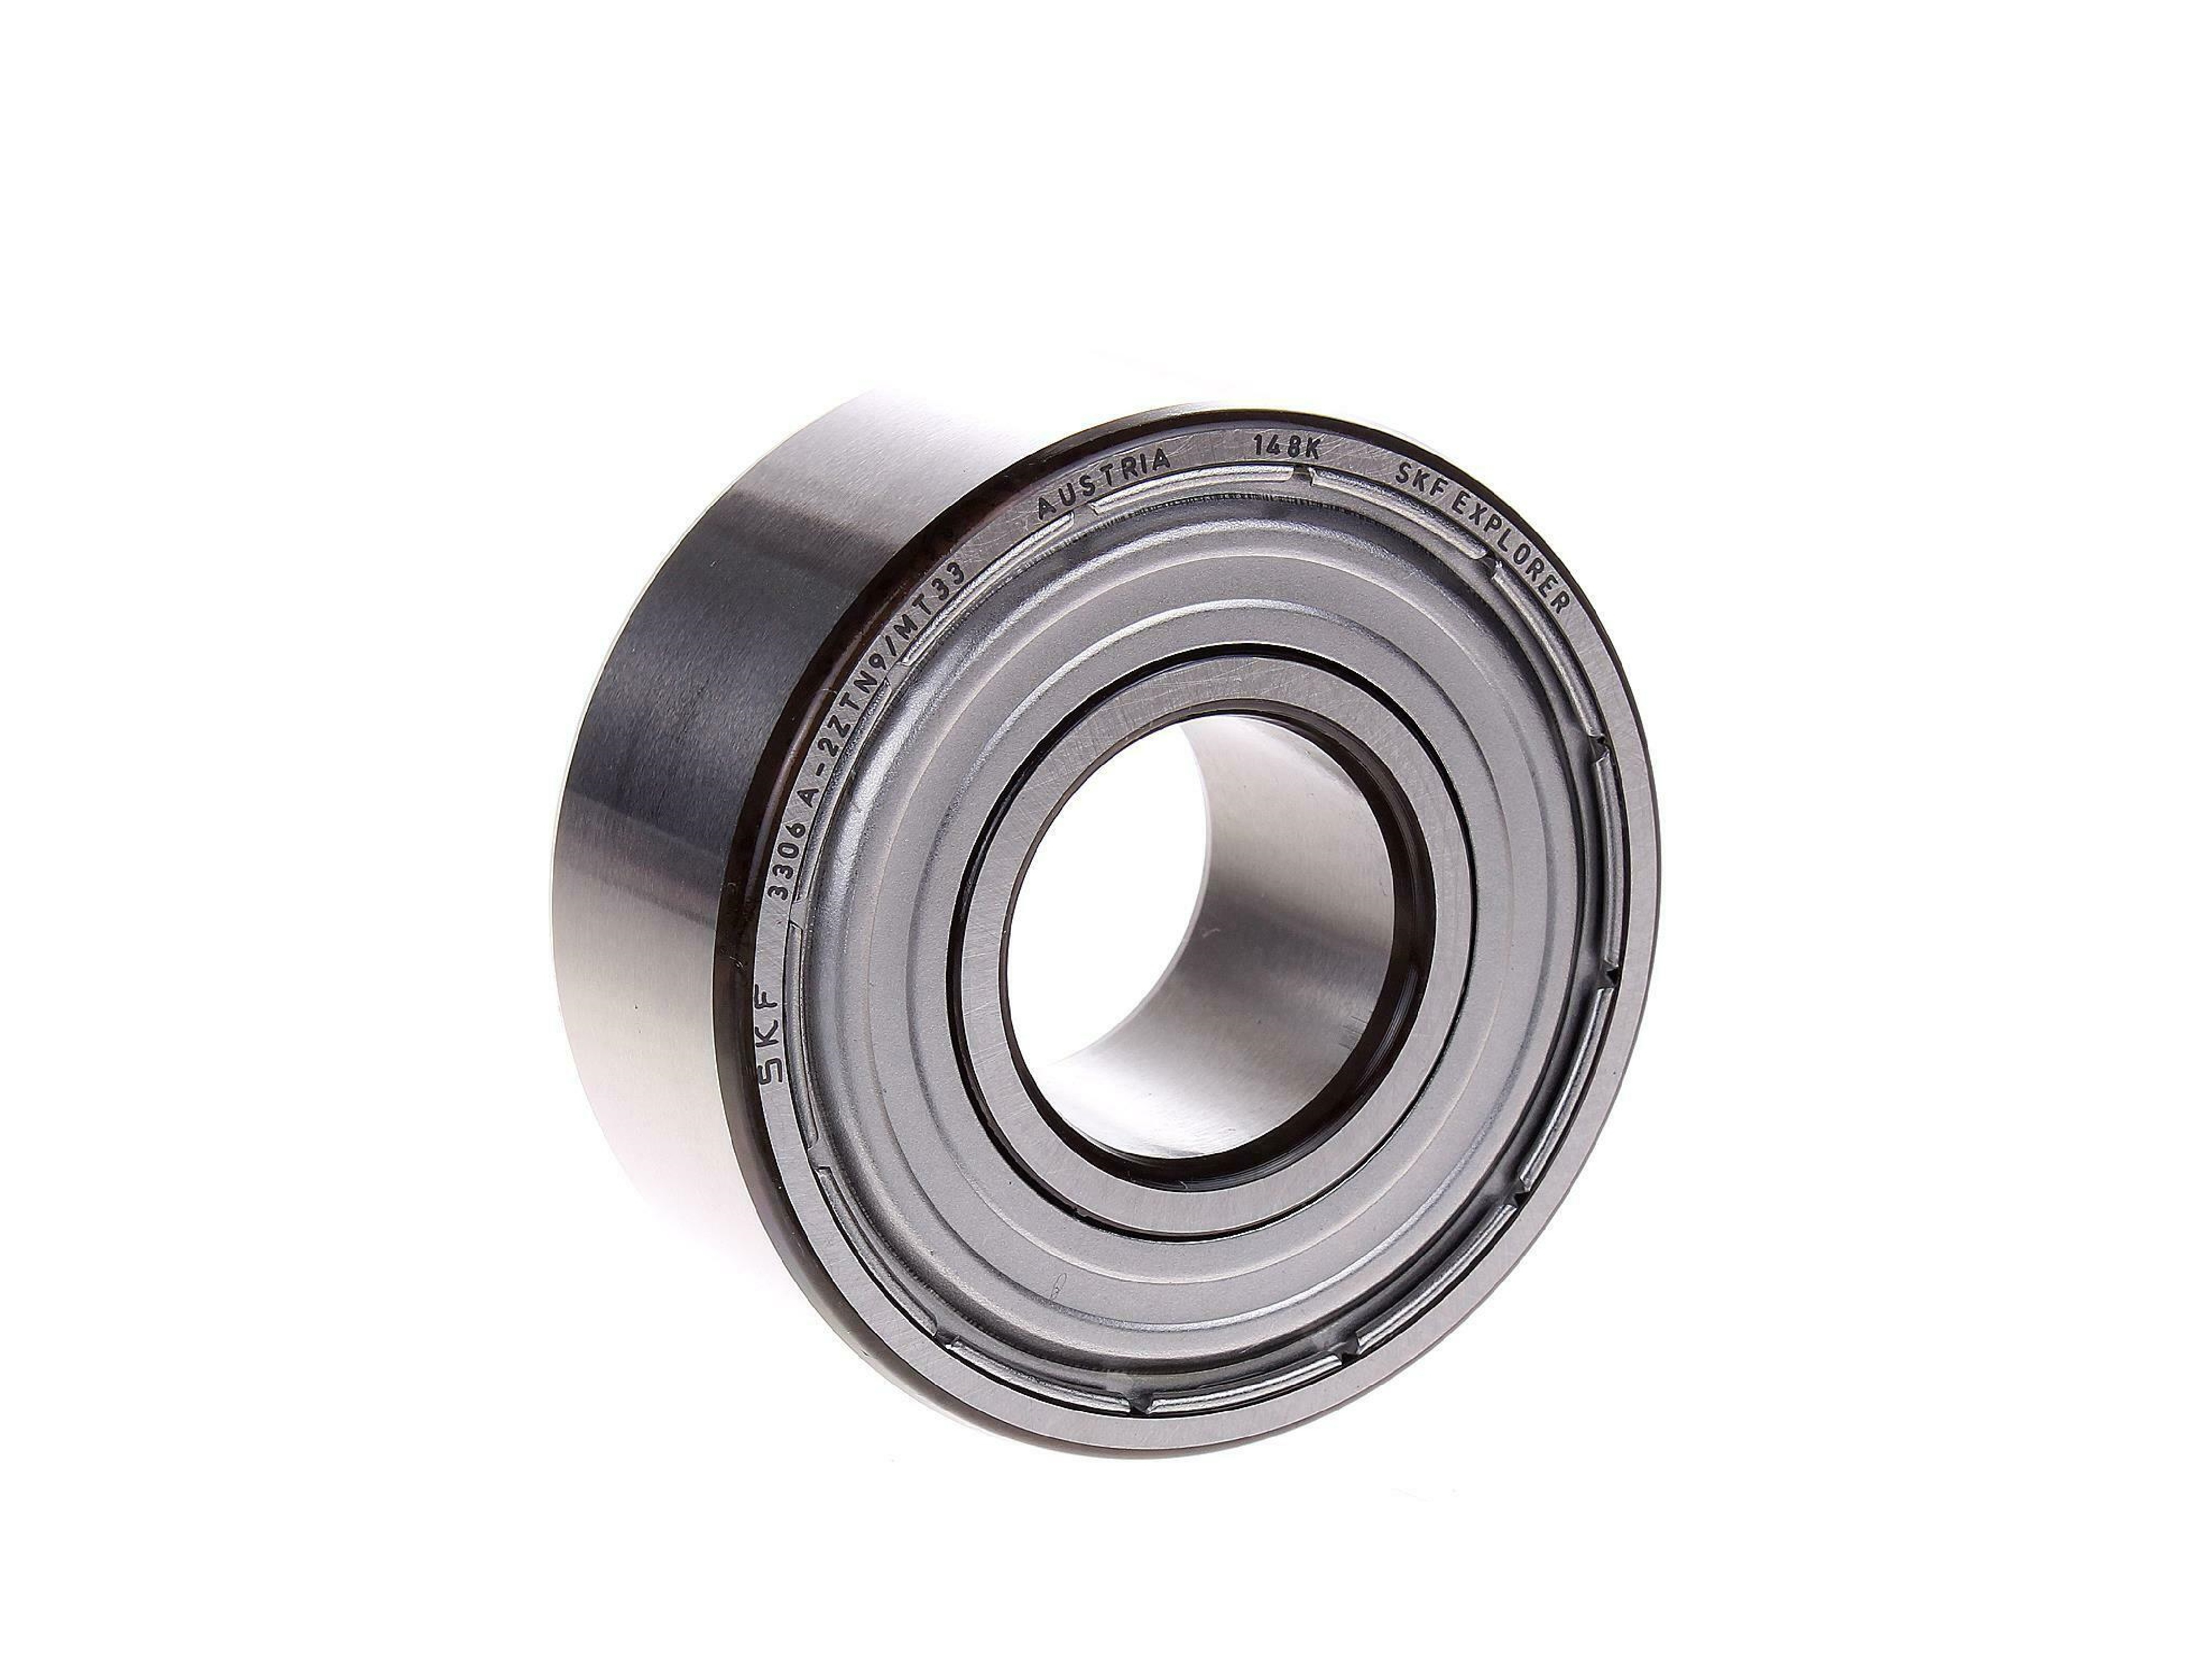 3303A-2ZTN9/MT33 SKF Double Row Angular Contact Ball Bearing - Shielded 17mm x 47mm x 22.2mm